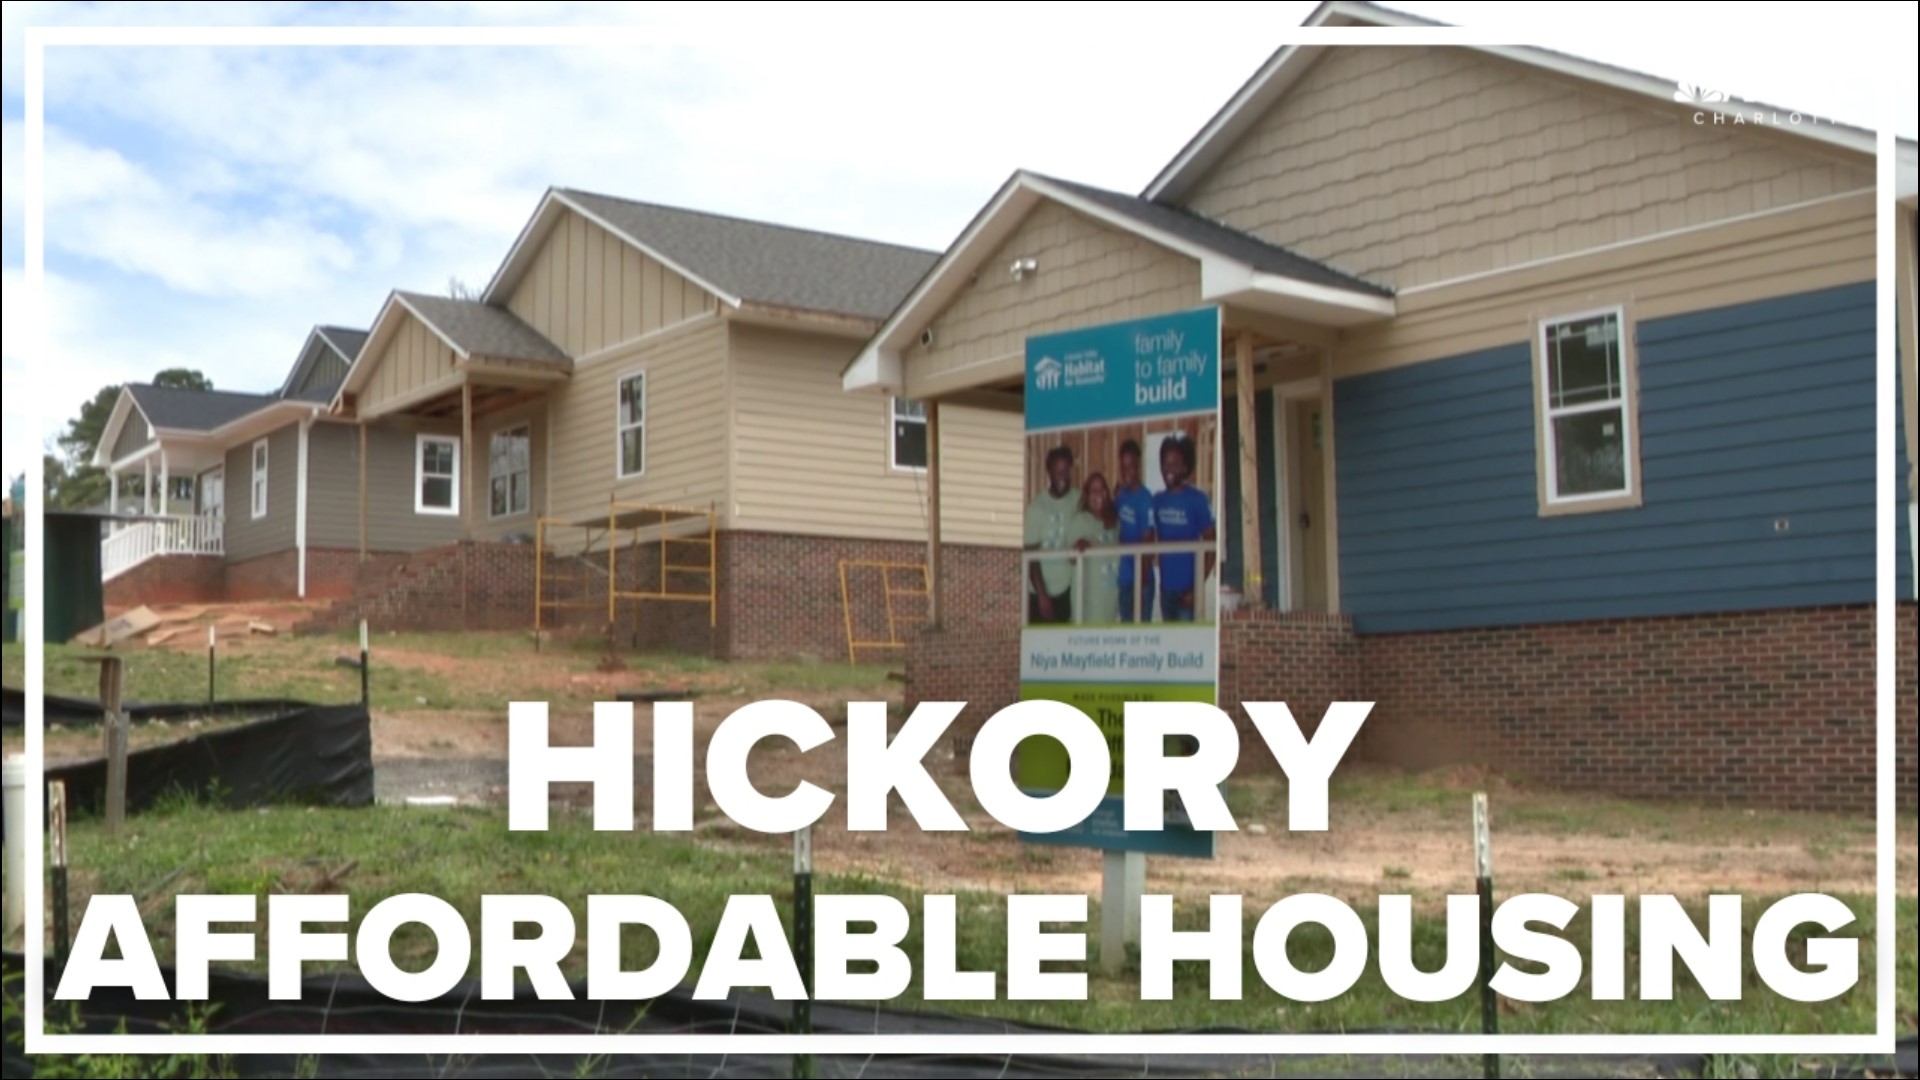 The City of Hickory is seeking solutions to affordable housing by helping families realize the dream of homeownership.